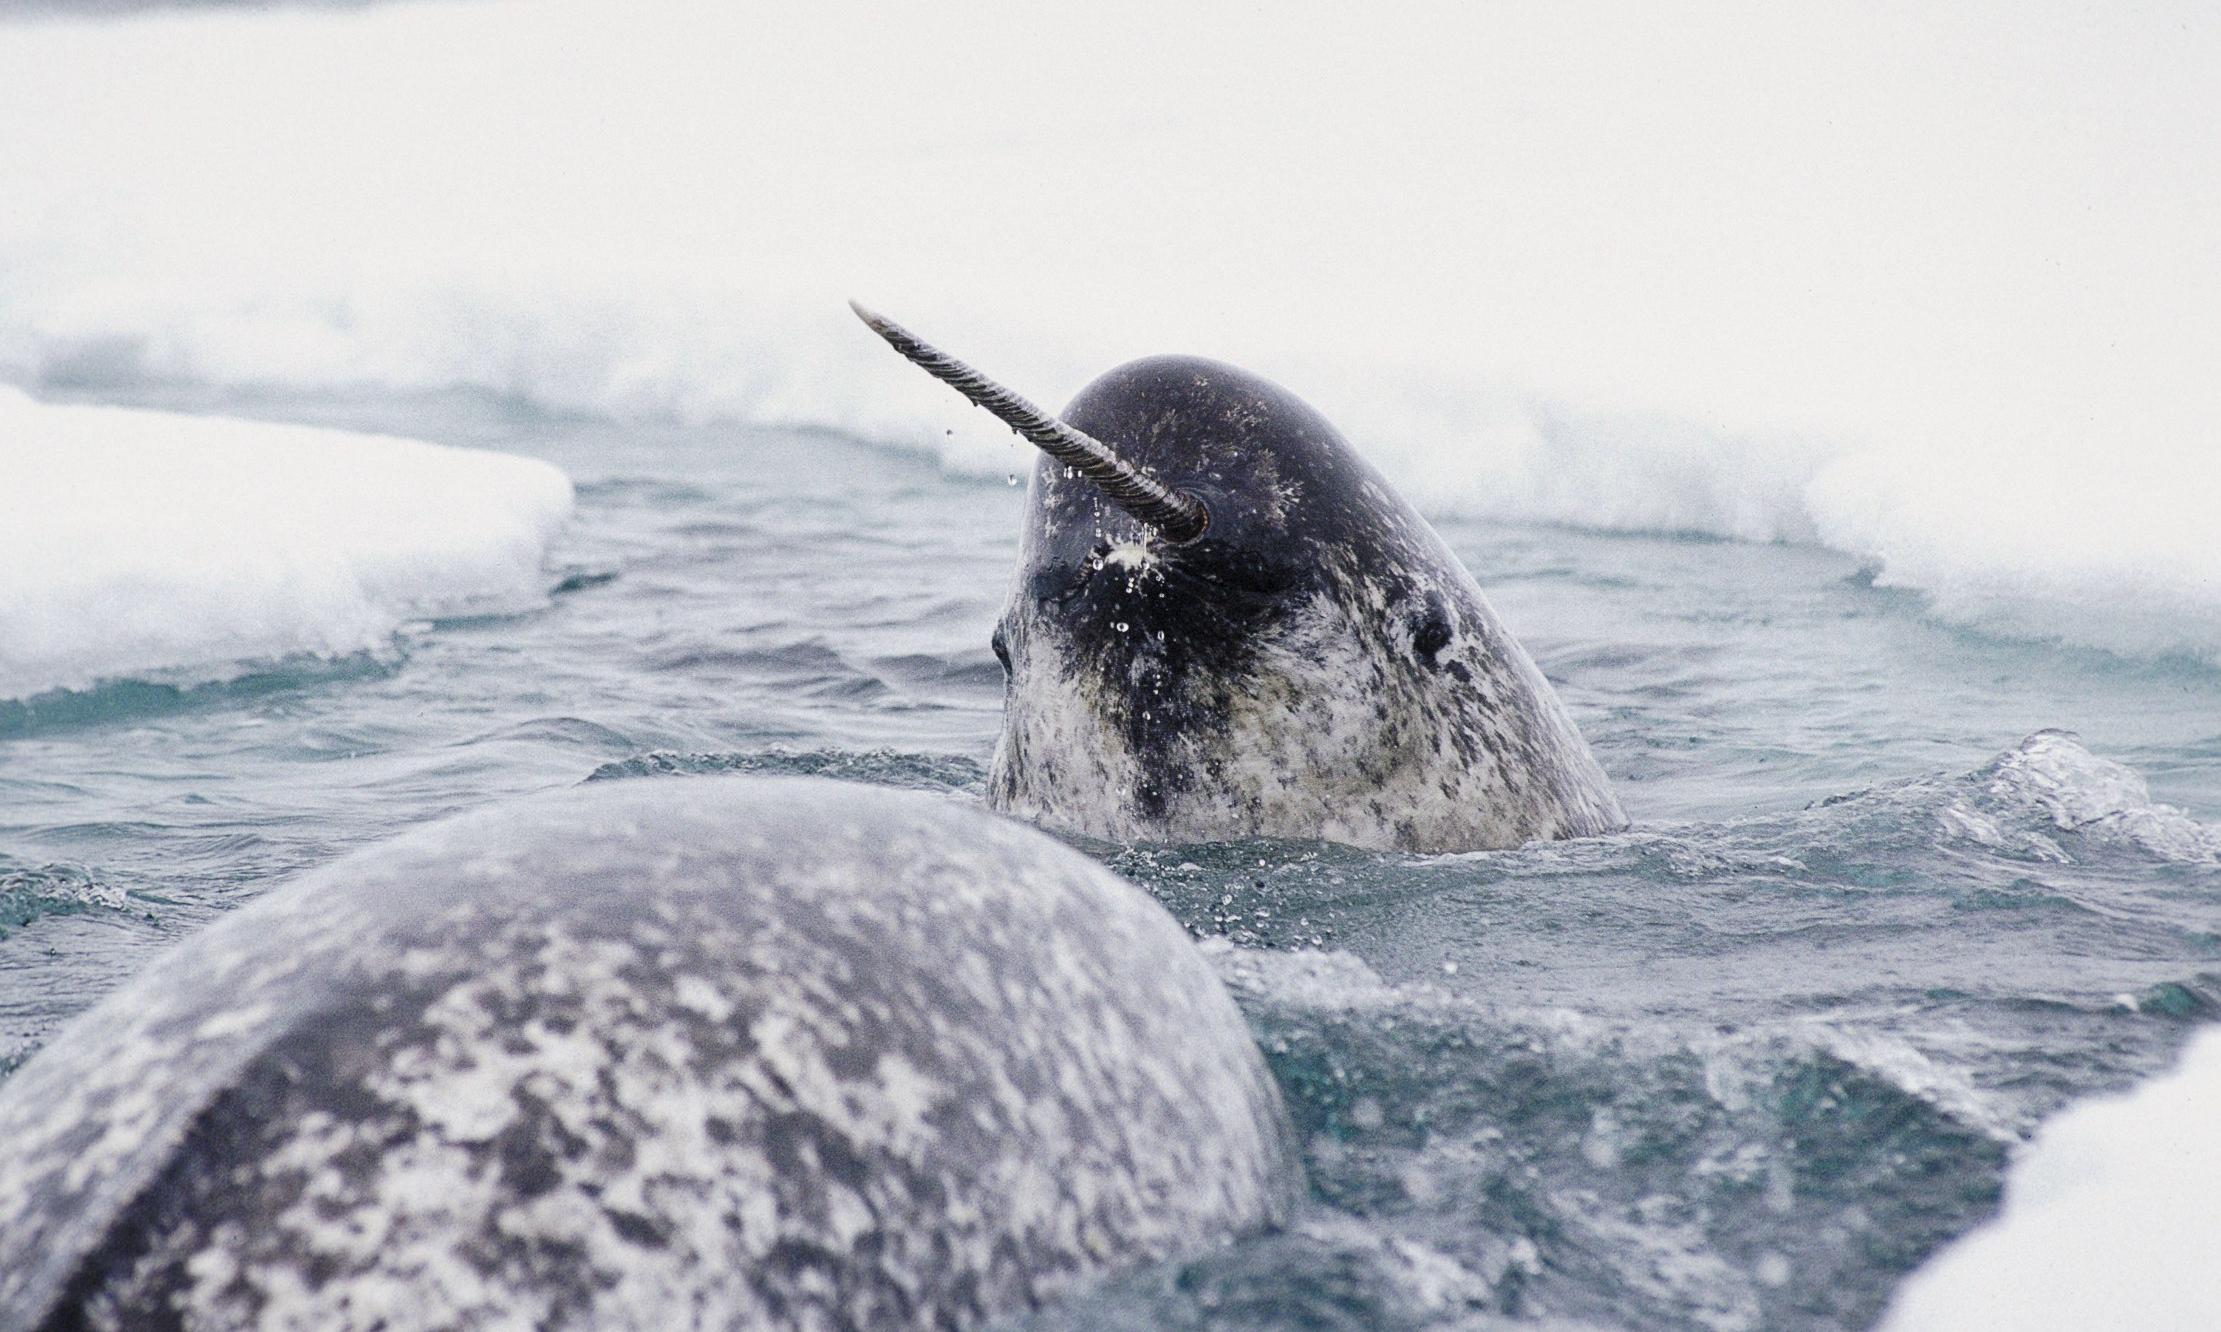 Narwhals adapting to climate crisis by delaying migration, study finds 